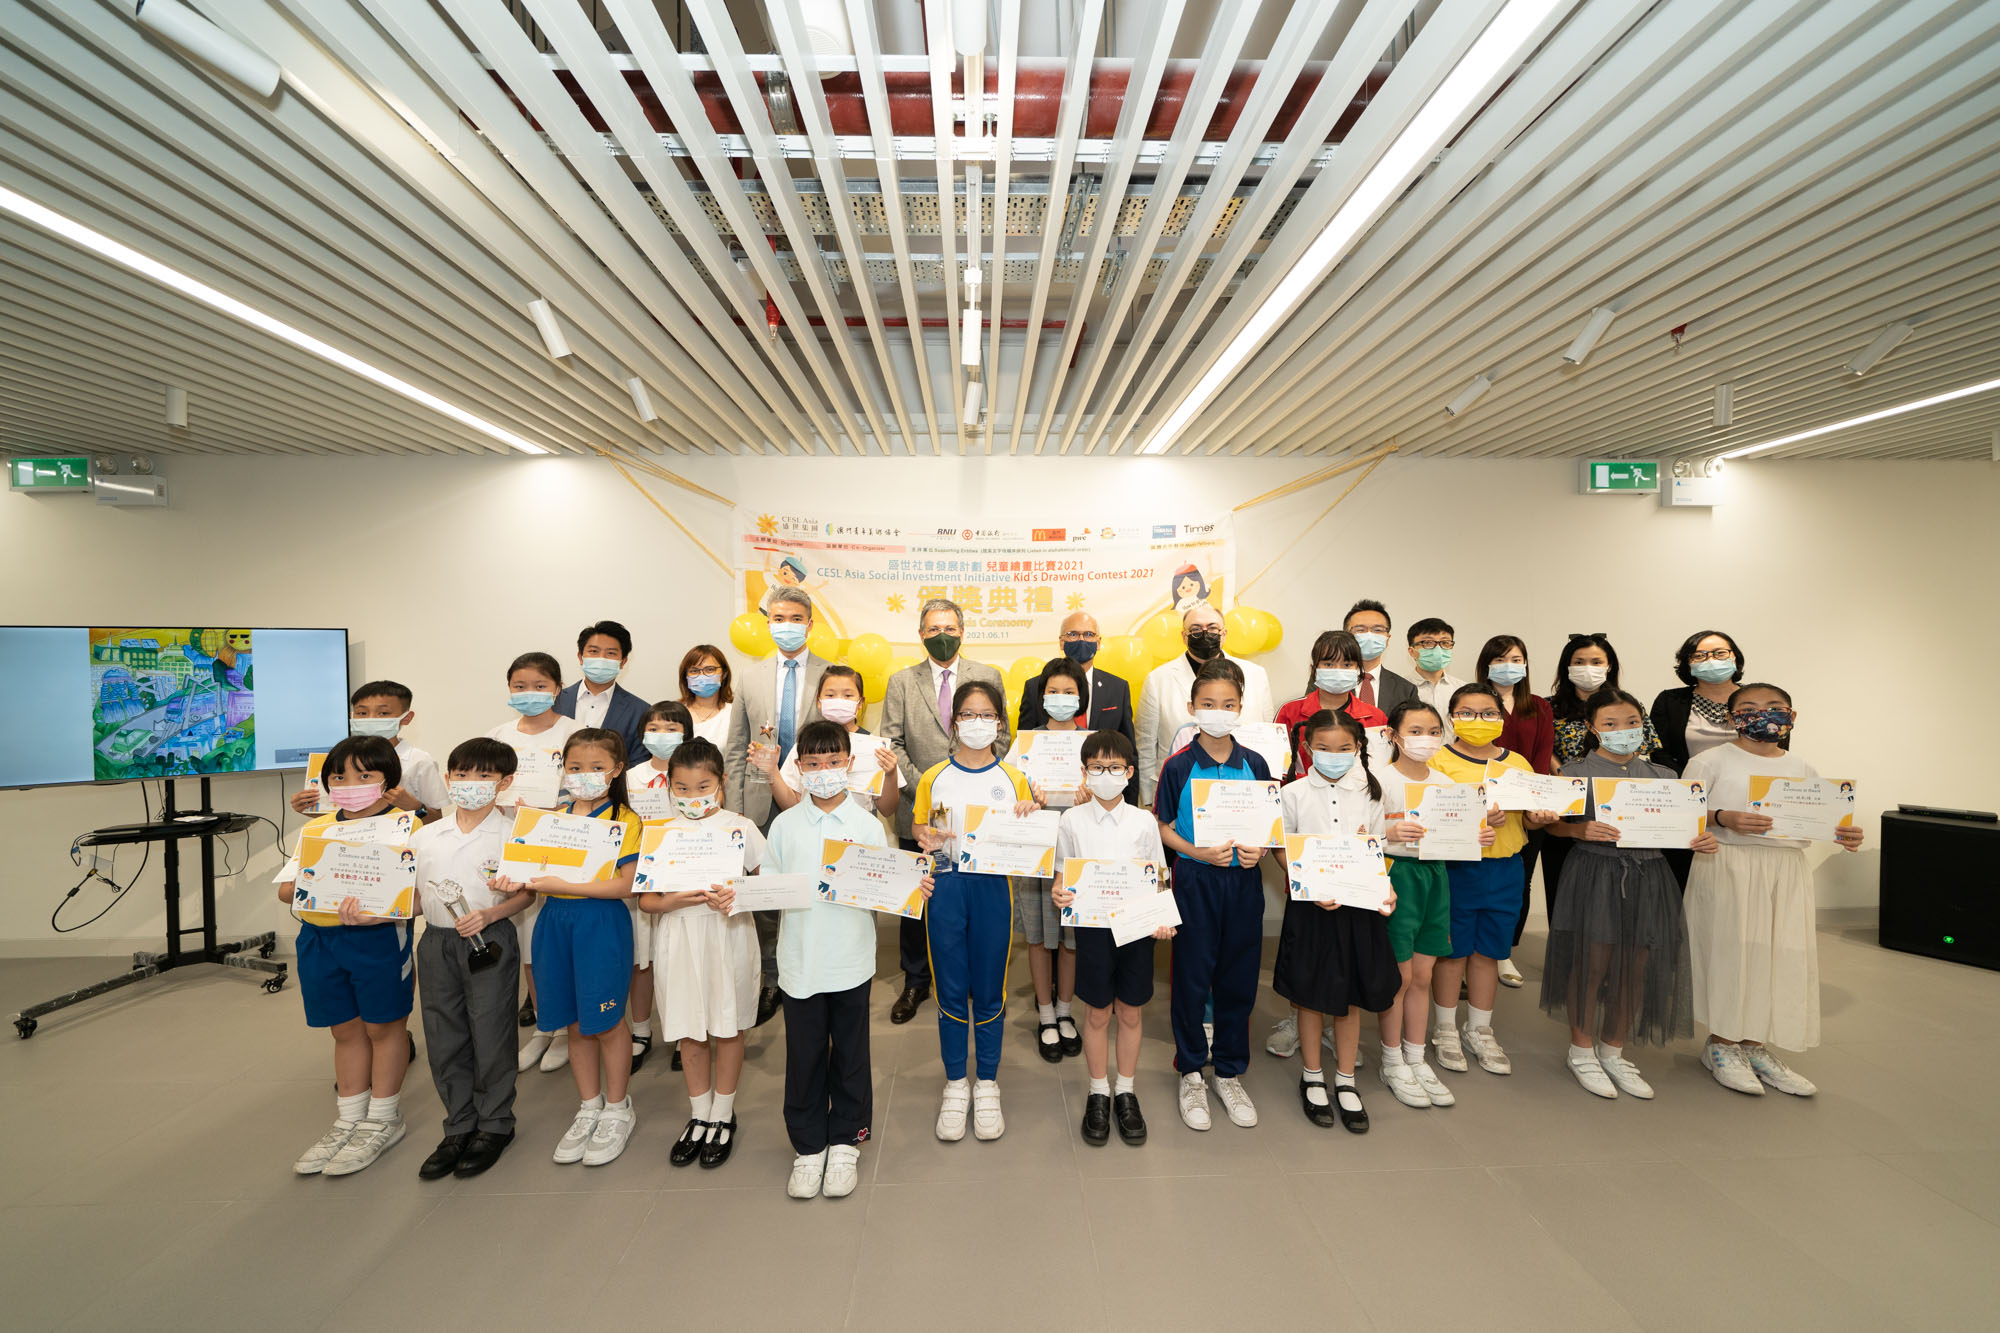 CESL Asia “Kid’s Drawing Contest 2021” awards prizes to students for their creative visions on “Our Sustainable City”